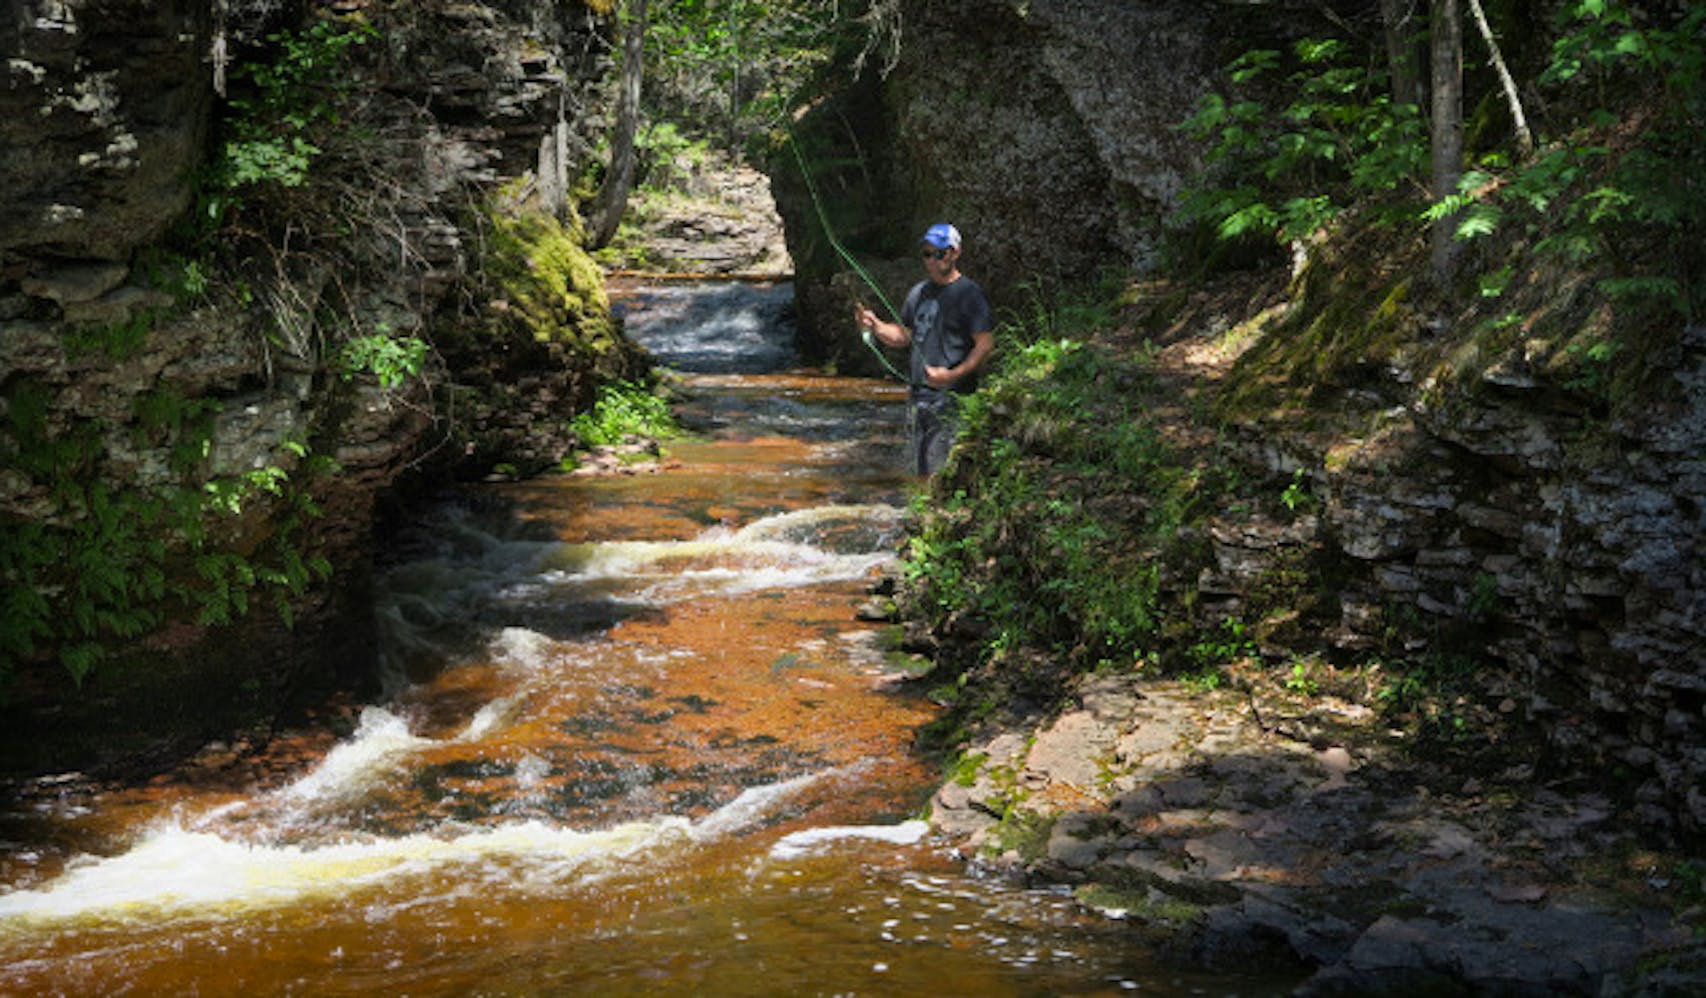 A fly angler worked the canyons of the Kadunce River on the North Shore.